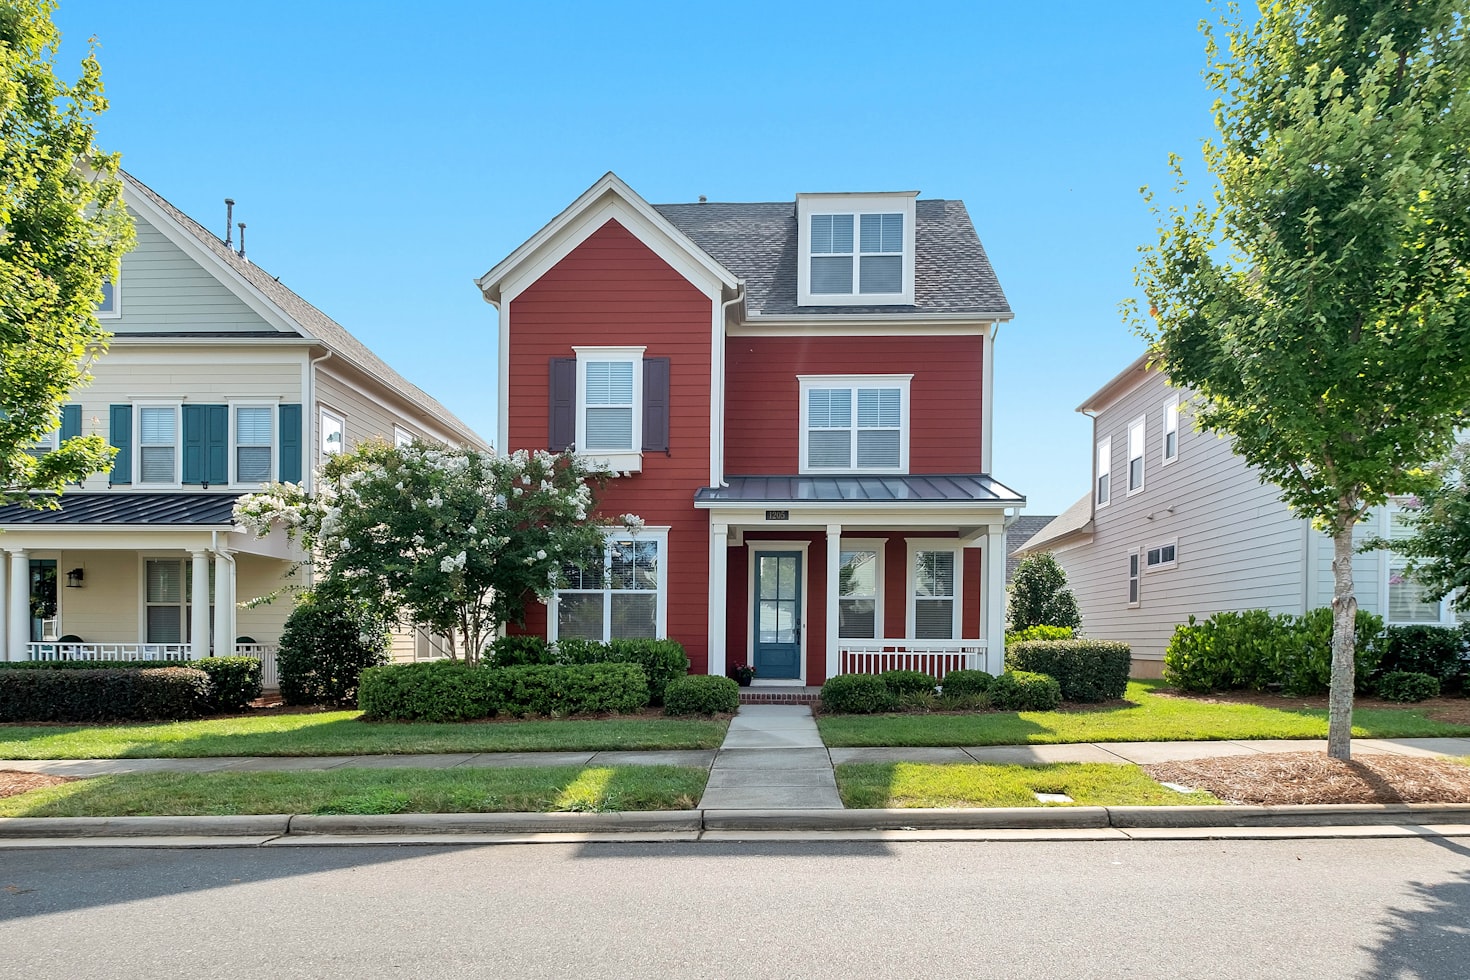  A Pretty Home with a Red Exterior and a Well-Maintained Front Yard in the Suburbs